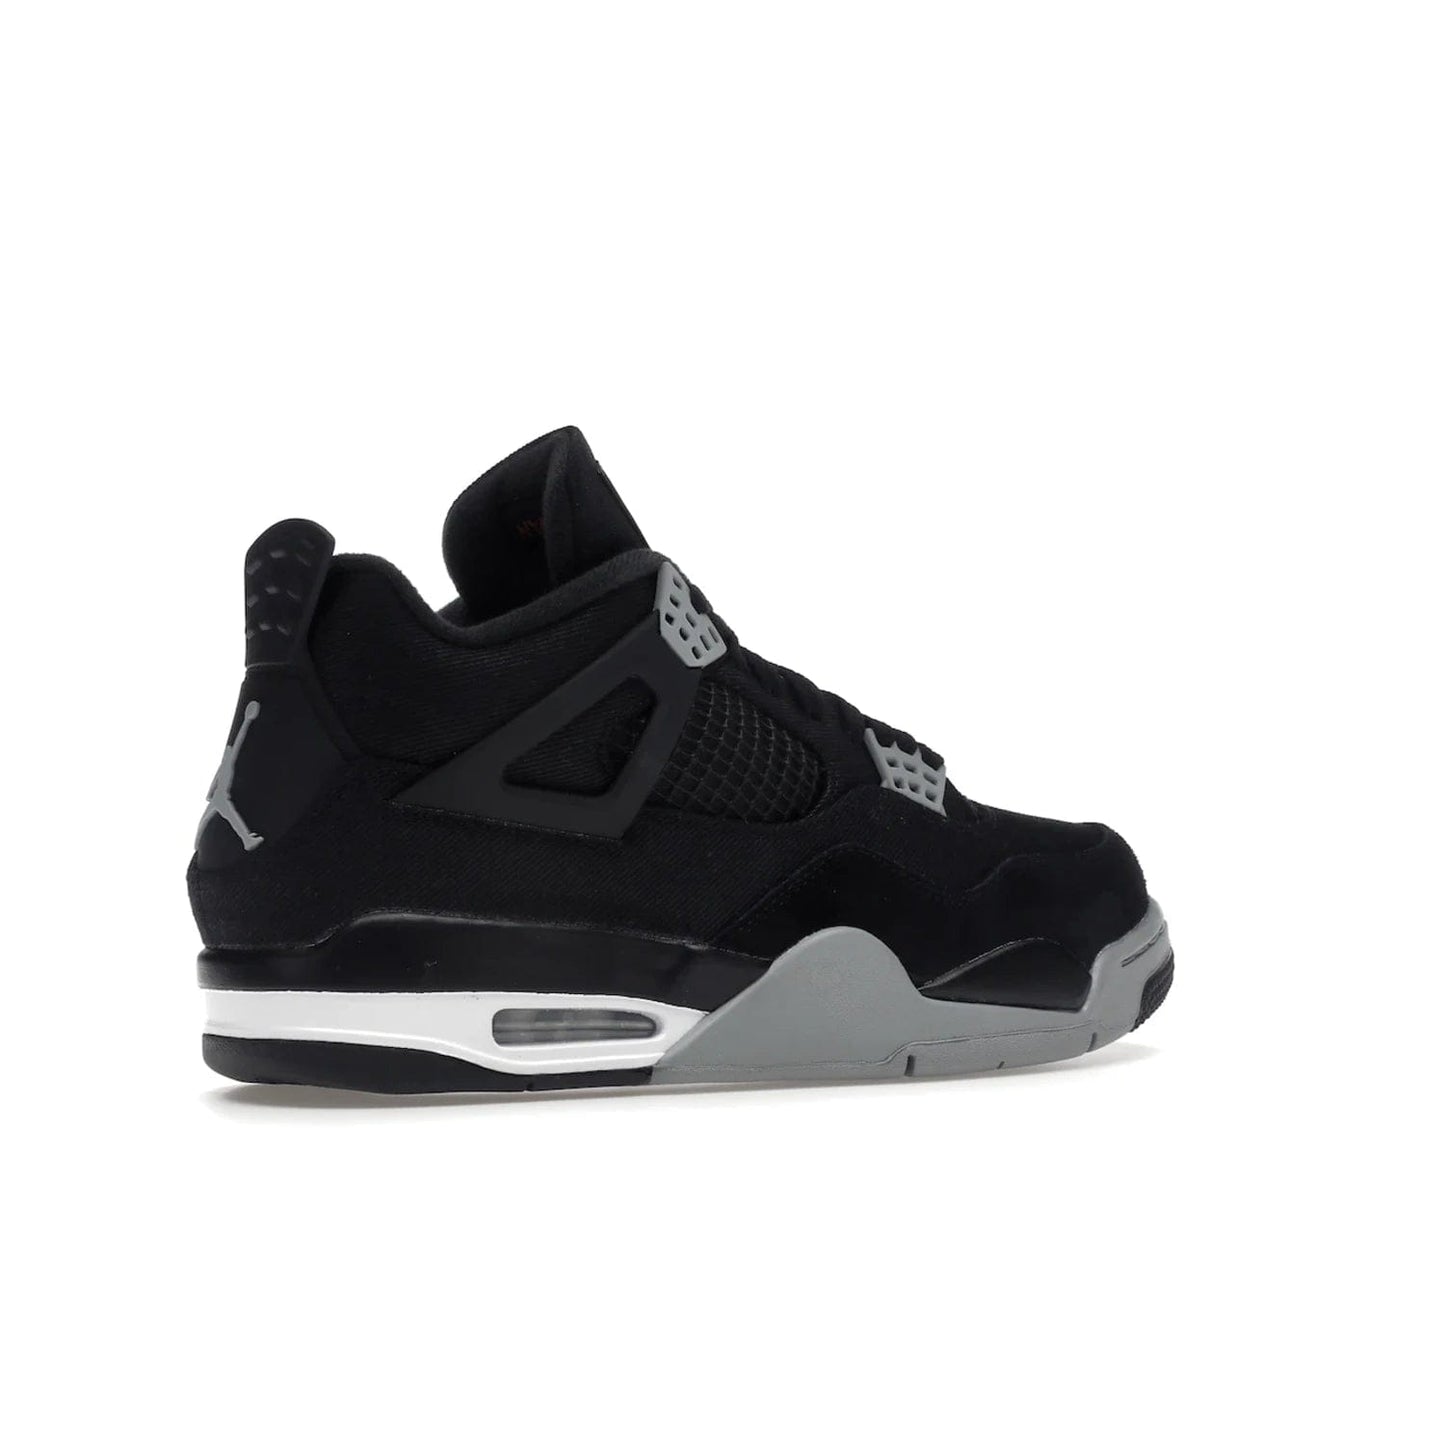 Jordan 4 Retro SE Black Canvas - Image 34 - Only at www.BallersClubKickz.com - The Air Jordan 4 Retro SE Black Canvas brings timeless style and modern luxury. Classic mid-top sneaker in black canvas and grey suede with tonal Jumpman logo, Flight logo and polyurethane midsole with visible Air-sole cushioning. Refresh your sneaker collection and rock the Air Jordan 4 Retro SE Black Canvas.